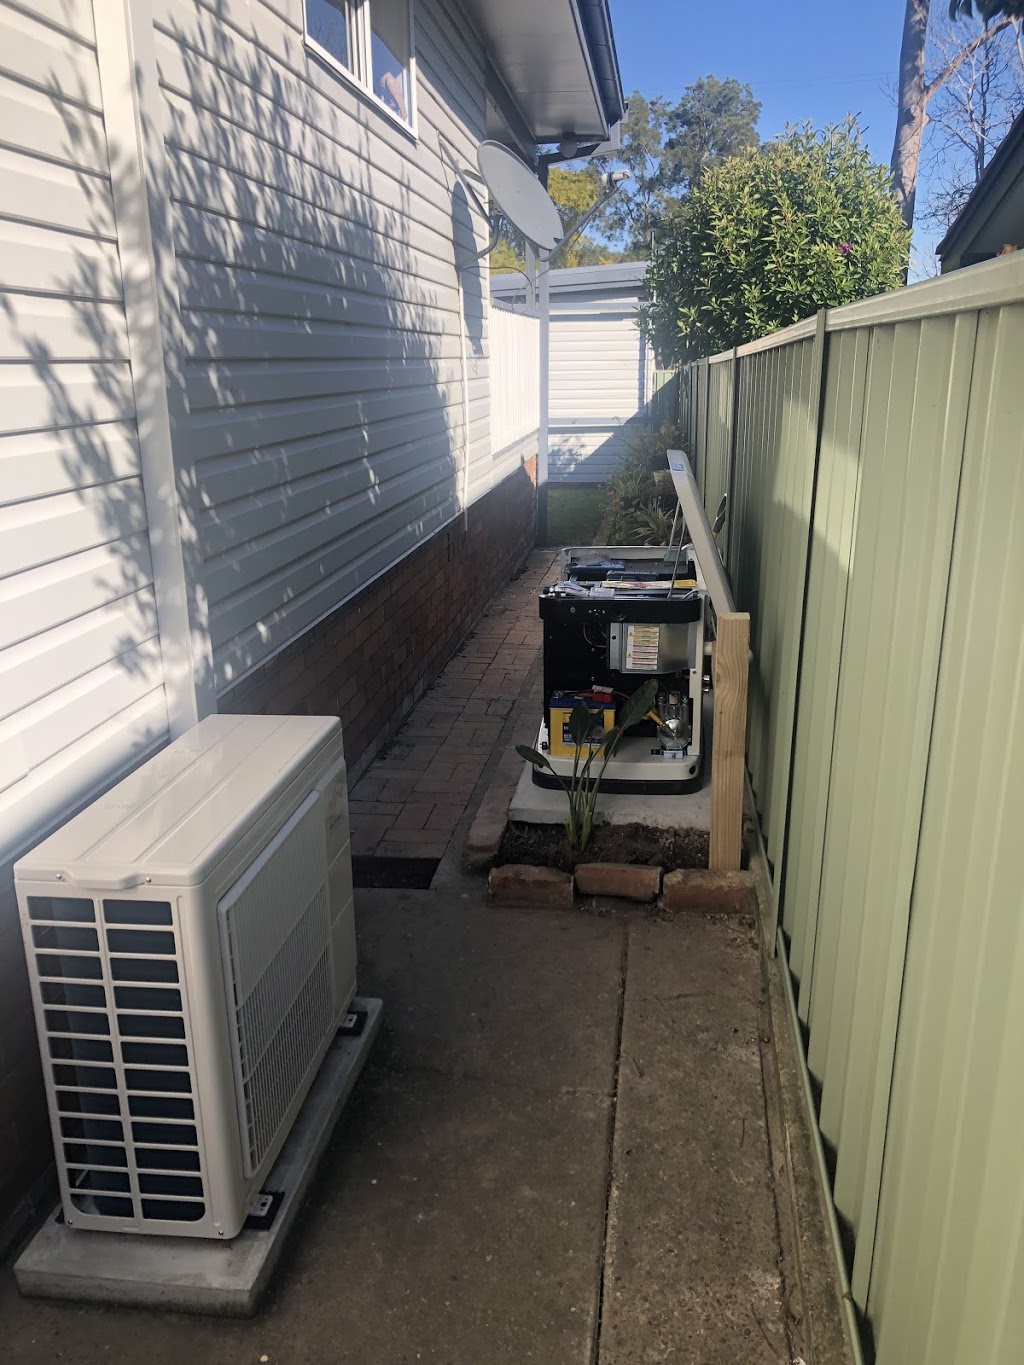 Always On Electrical Services Generator & Energy Innovations | electrician | 9 Weatherley St, Booragul NSW 2284, Australia | 0473453875 OR +61 473 453 875